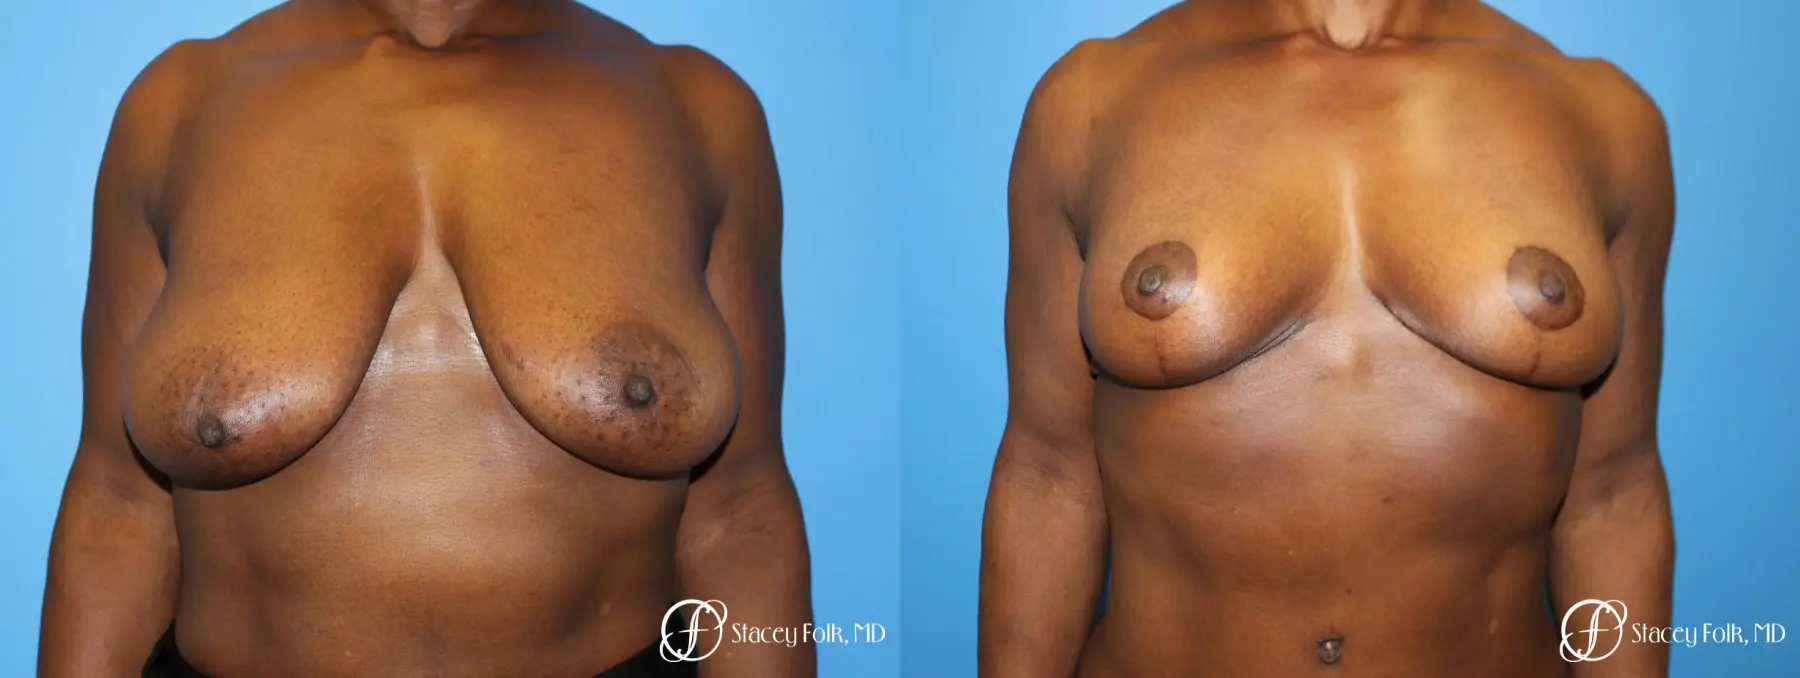 Denver Breast Reduction (Mastopexy) 7081 - Before and After